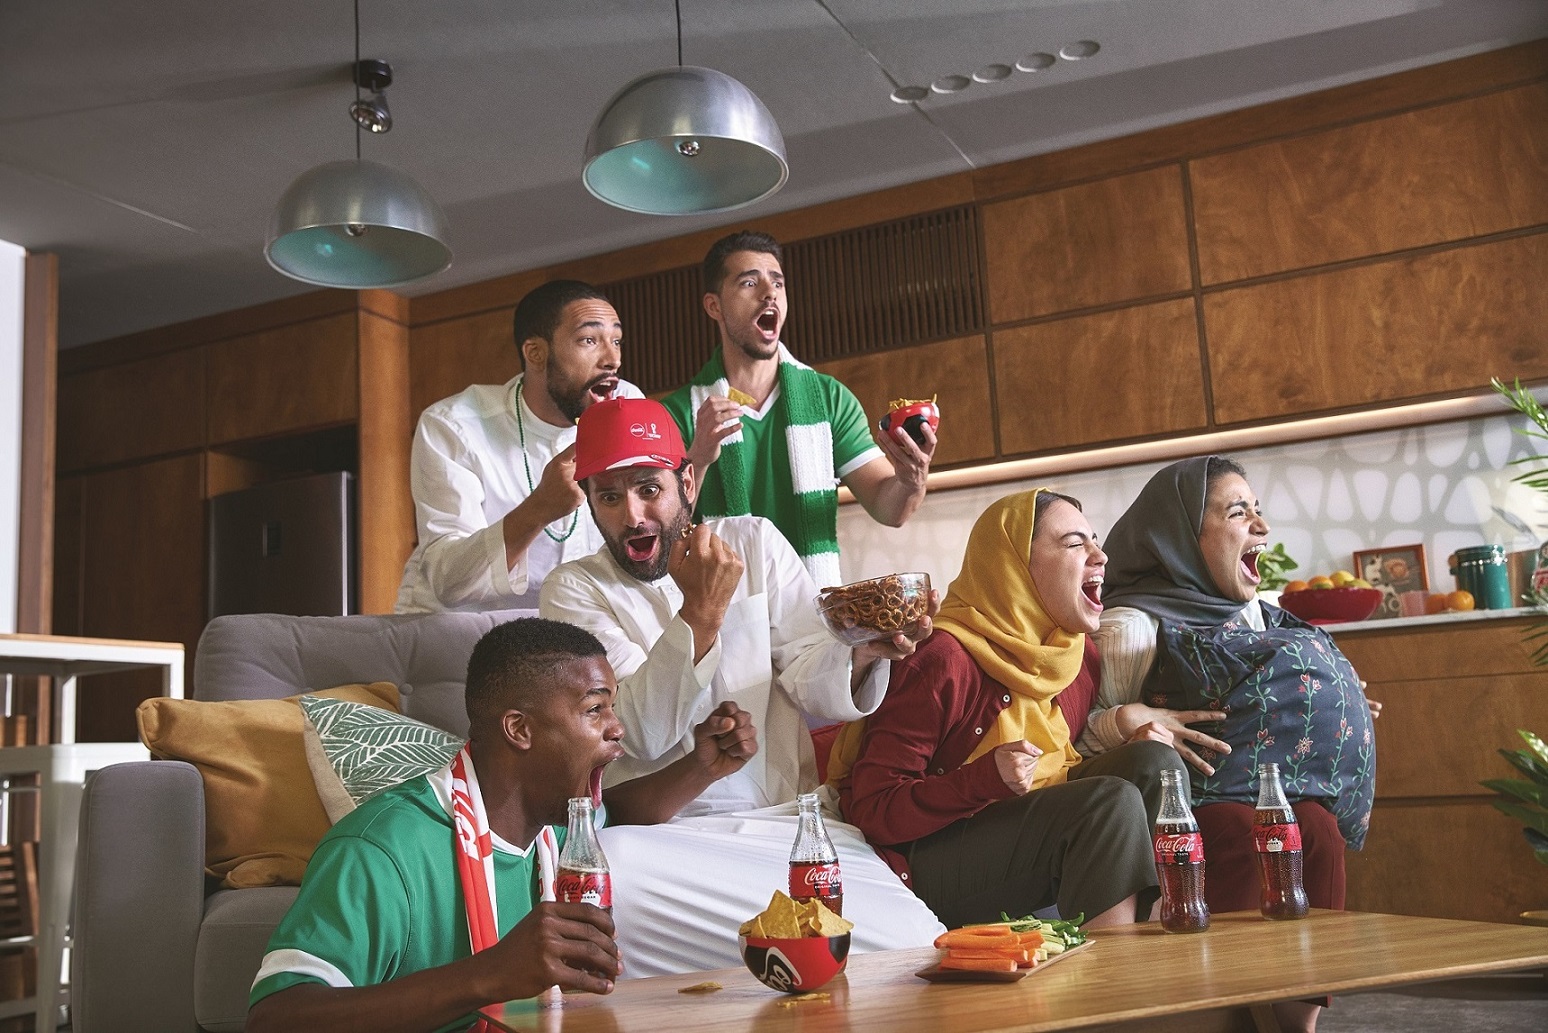 Coca-Cola Middle East is giving you a chance to see the FIFA World Cup 2022 live